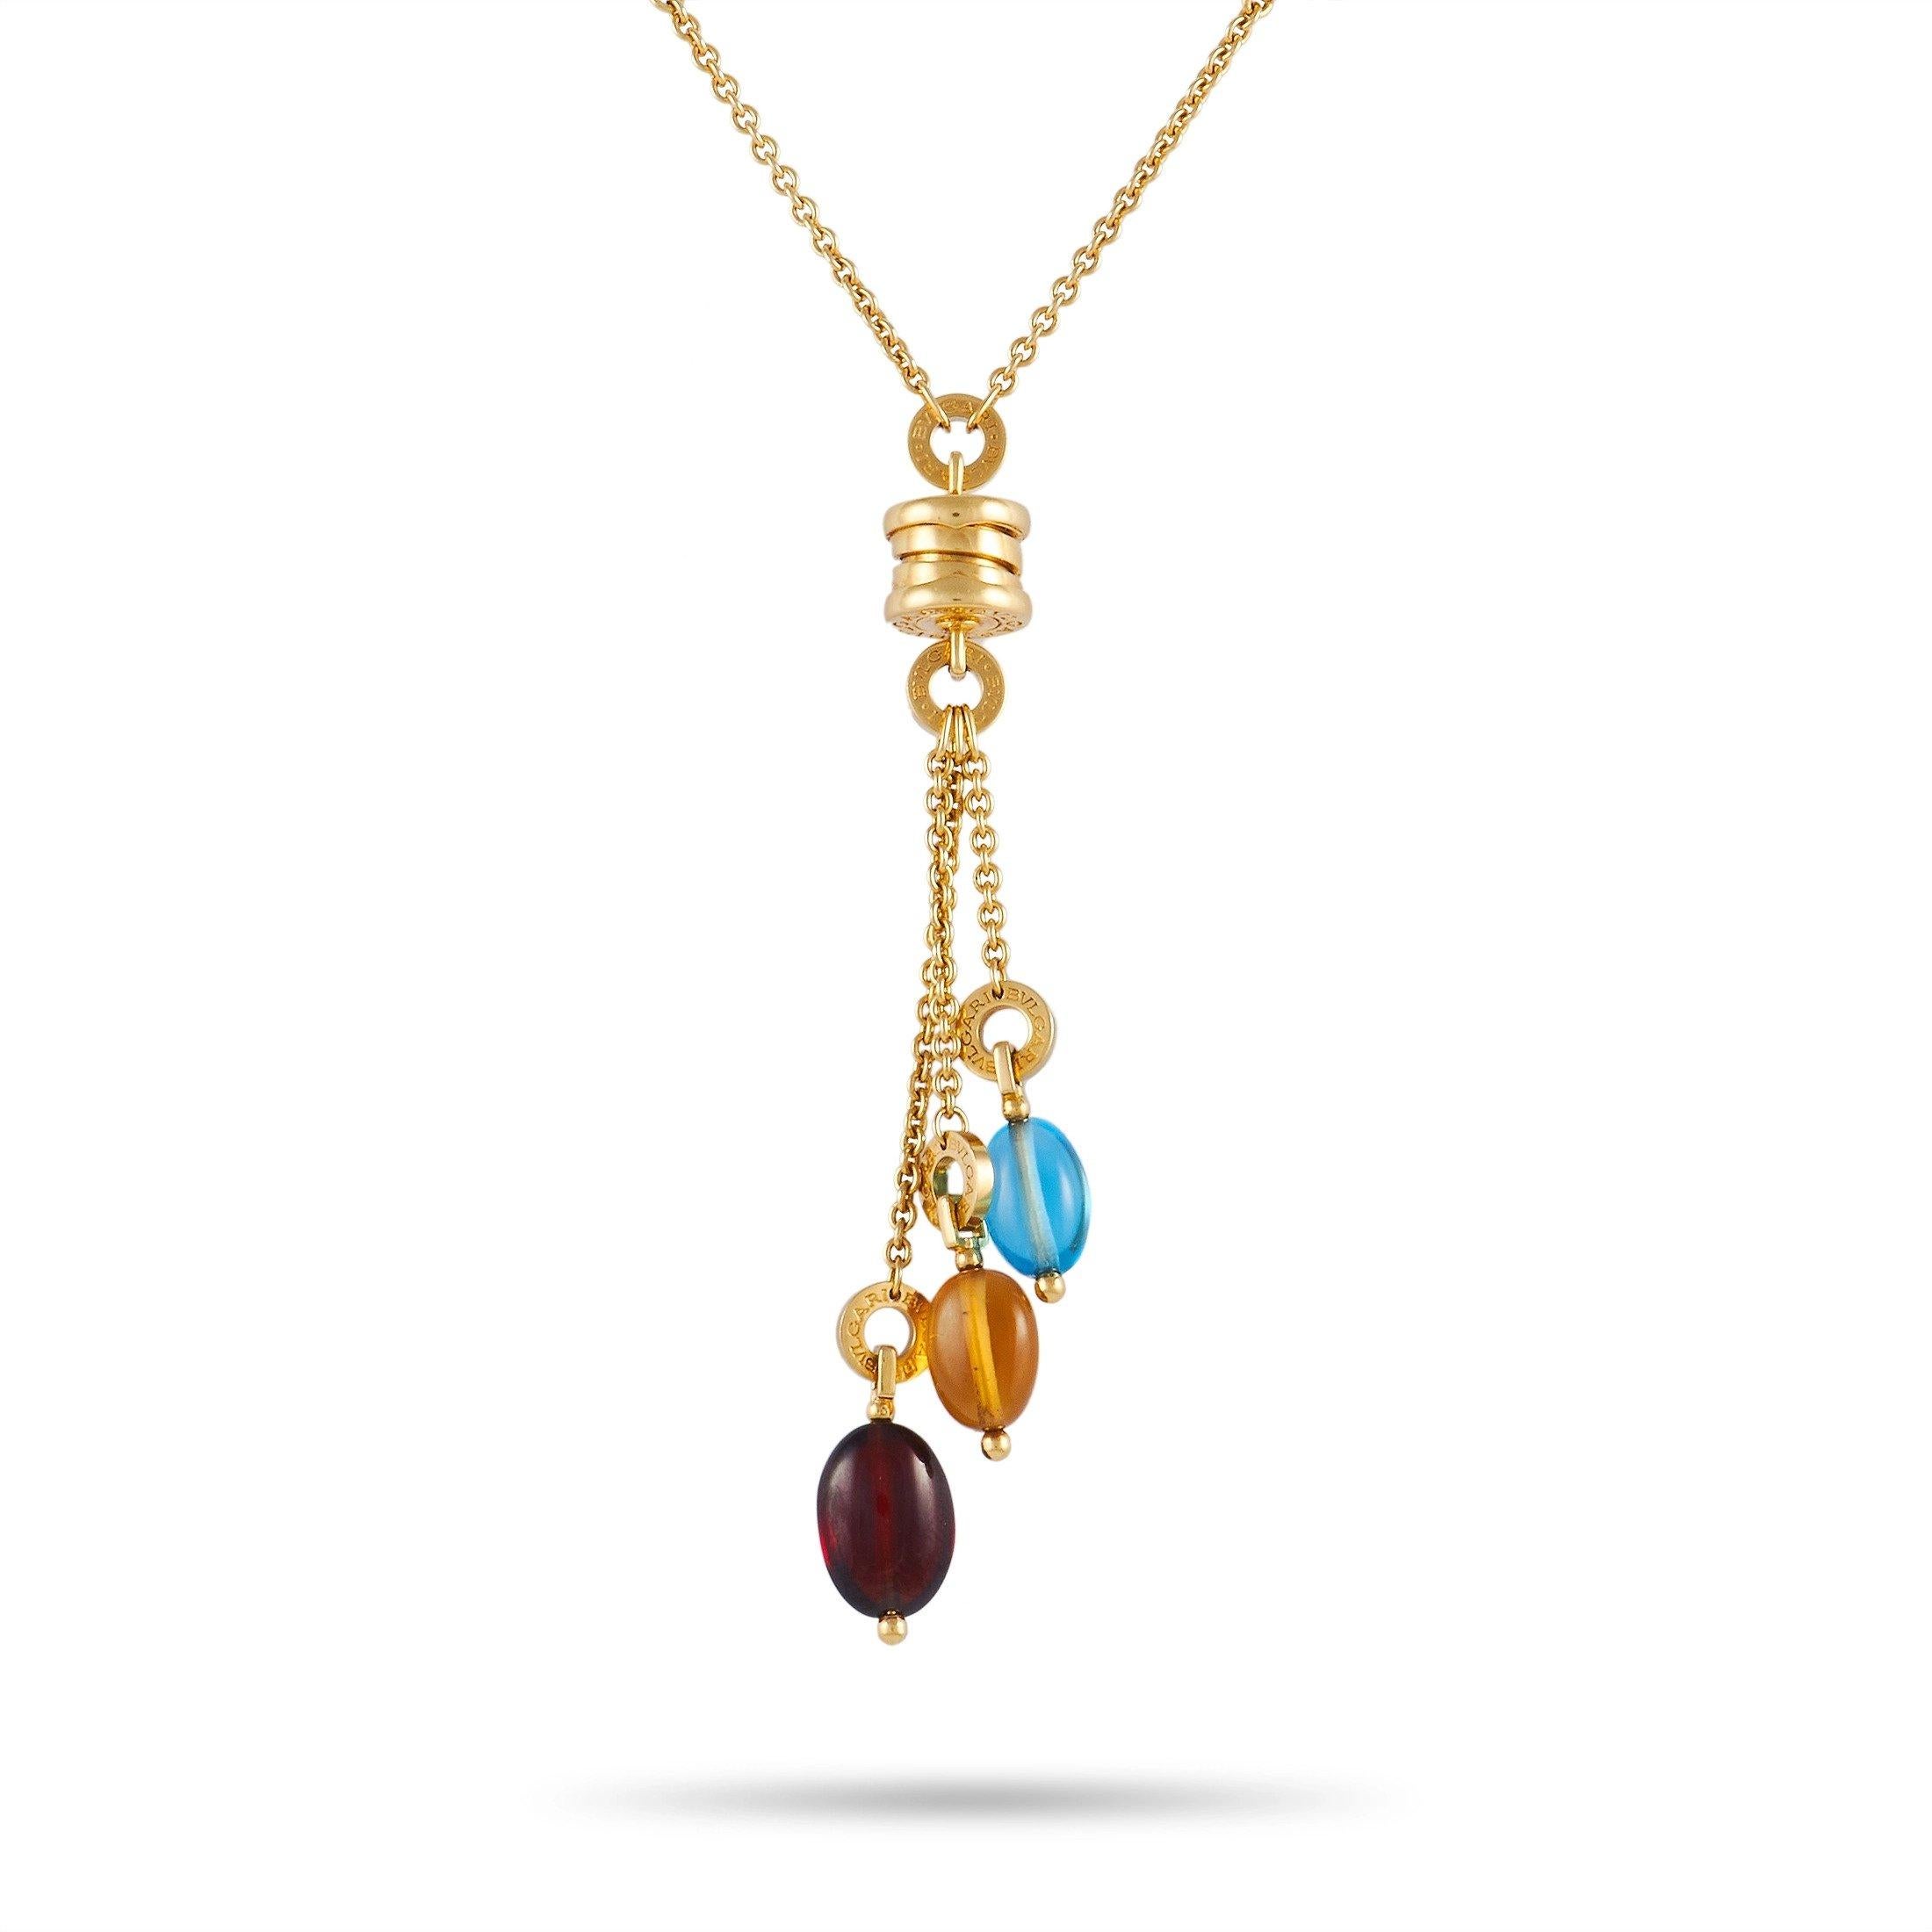 This Bvlgari B.Zero1 necklace is a vibrant, creative showpiece that will earn you endless compliments. The perfect piece for anyone who isn’t afraid of color, the 3” long dangle comes to life thanks to a series of strands accented by multicolored